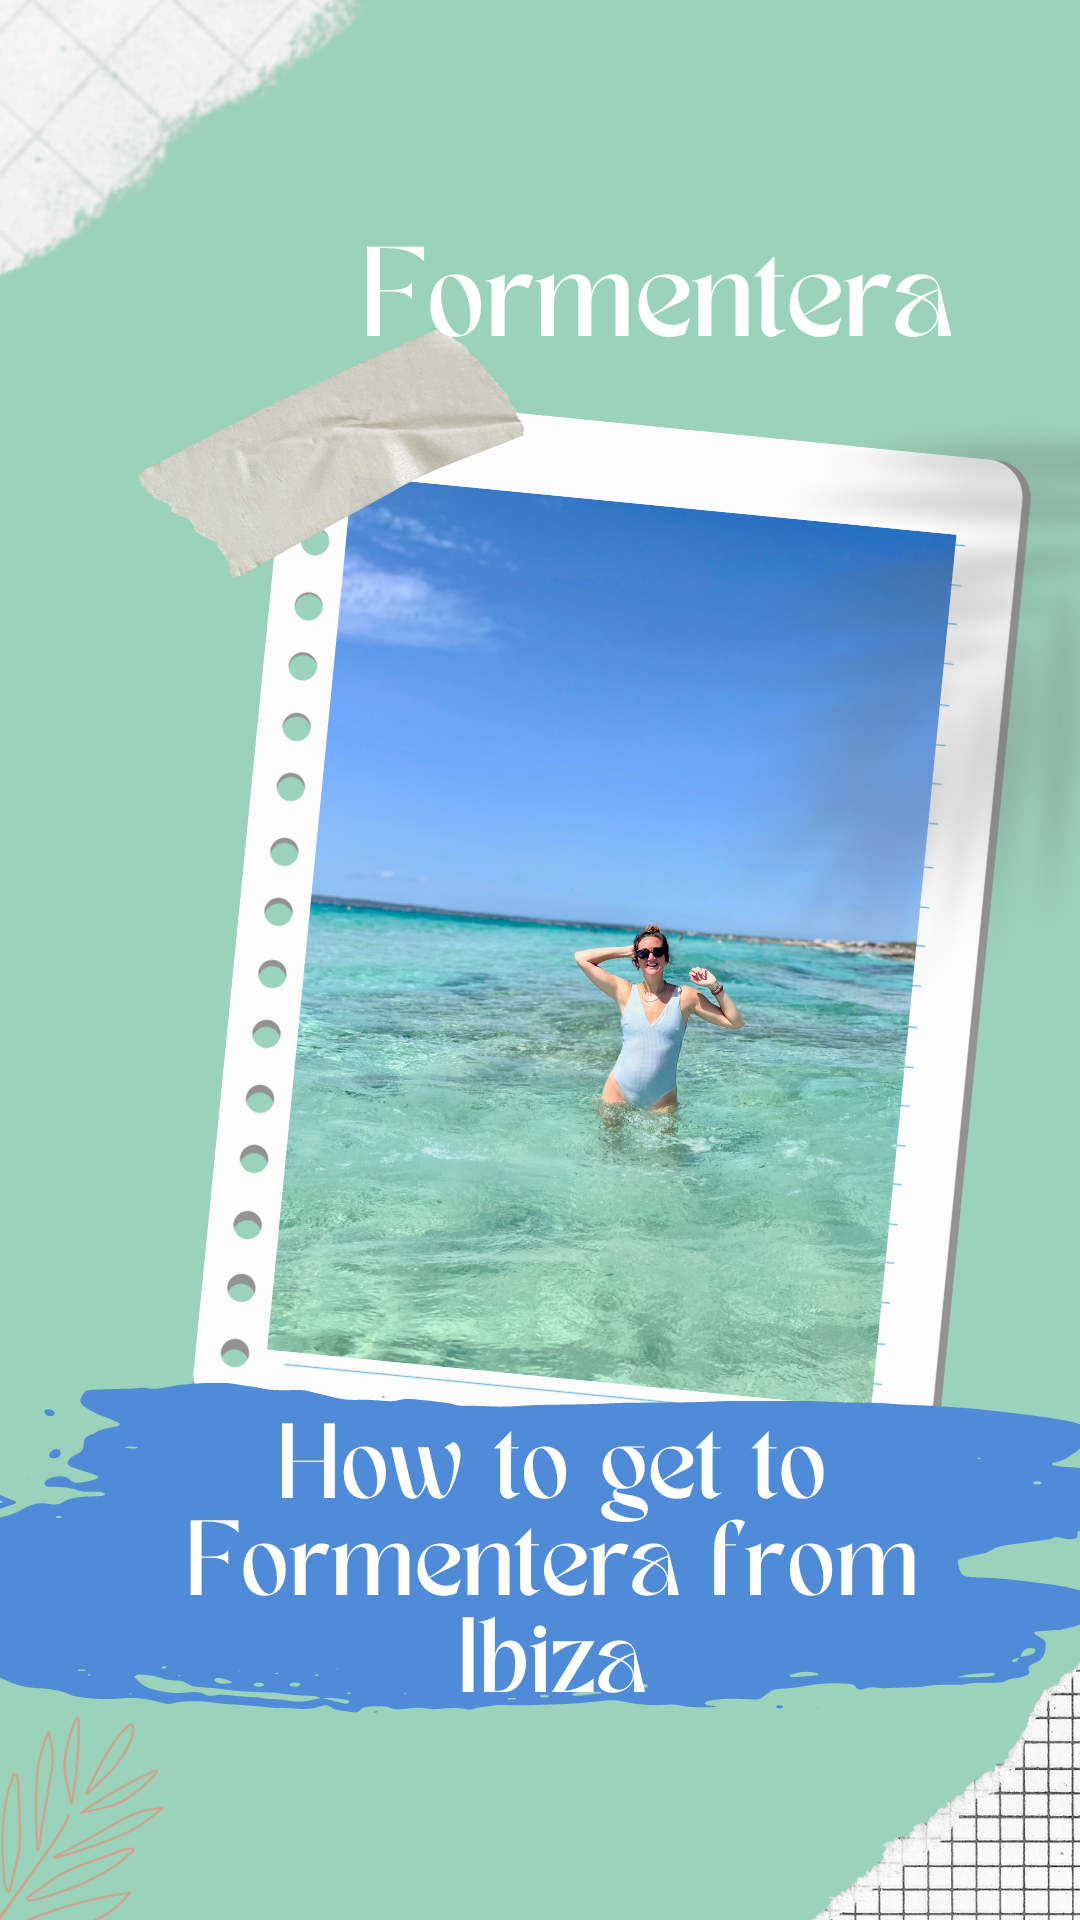 How to get to Formentera from Ibiza and things to do in Formentera